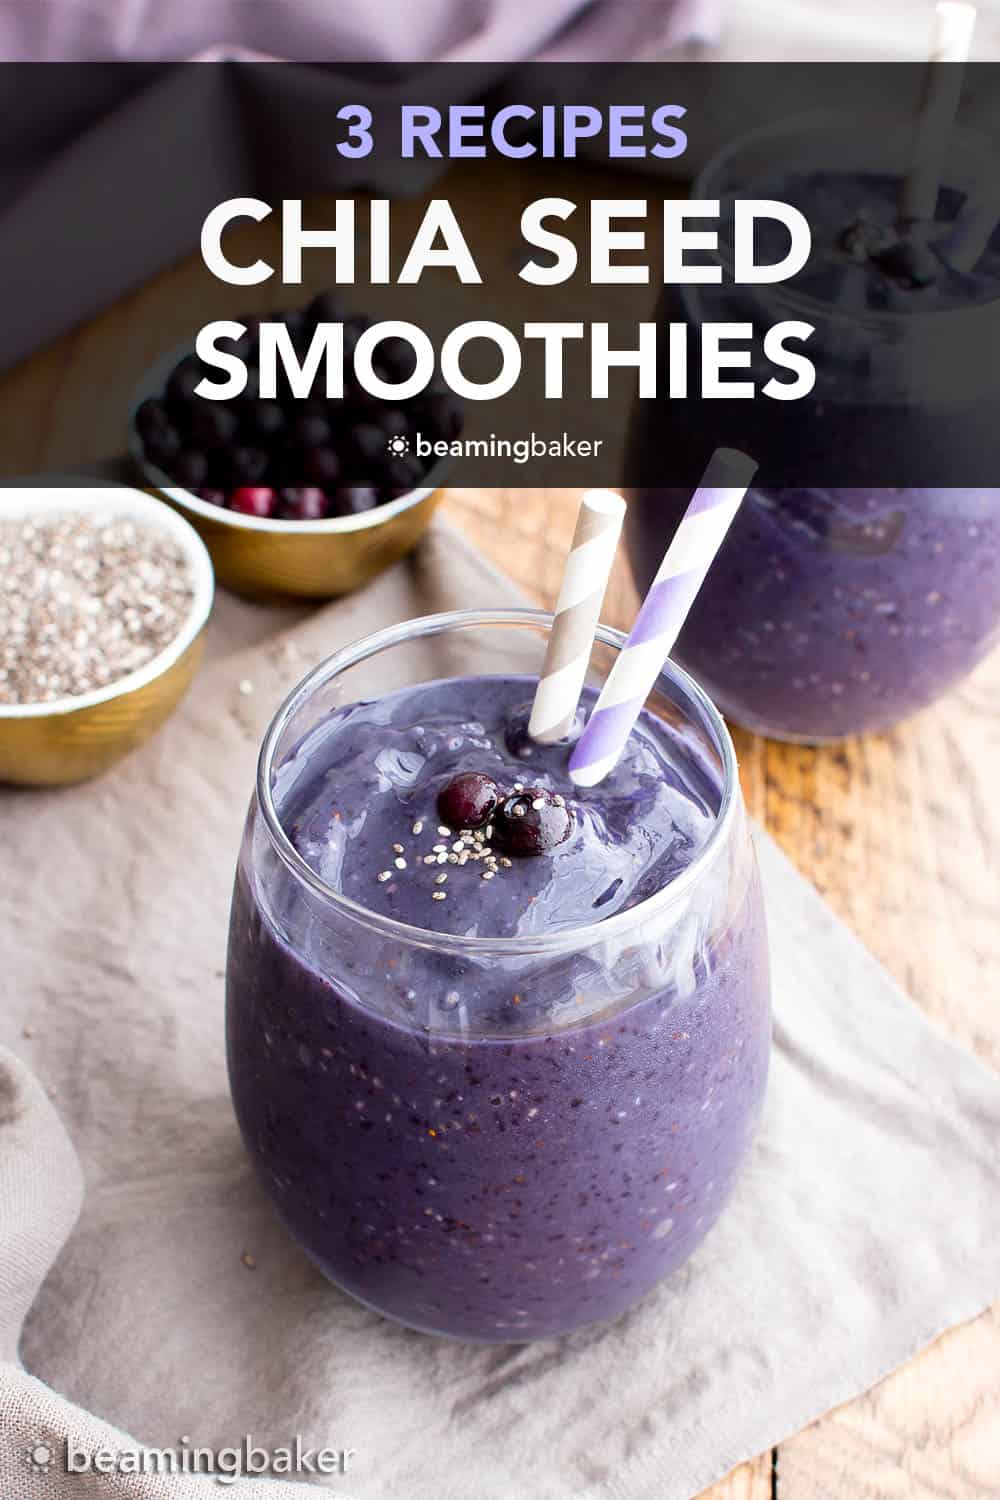 Chia Seed Smoothie Recipes – 3 Ways: learn how to make chia seed smoothies 3 delicious ways—the freshest, easiest ways to include chia seeds in a smoothie! #ChiaSeeds #Smoothie #Chia #ChiaSeed | Recipes at BeamingBaker.com